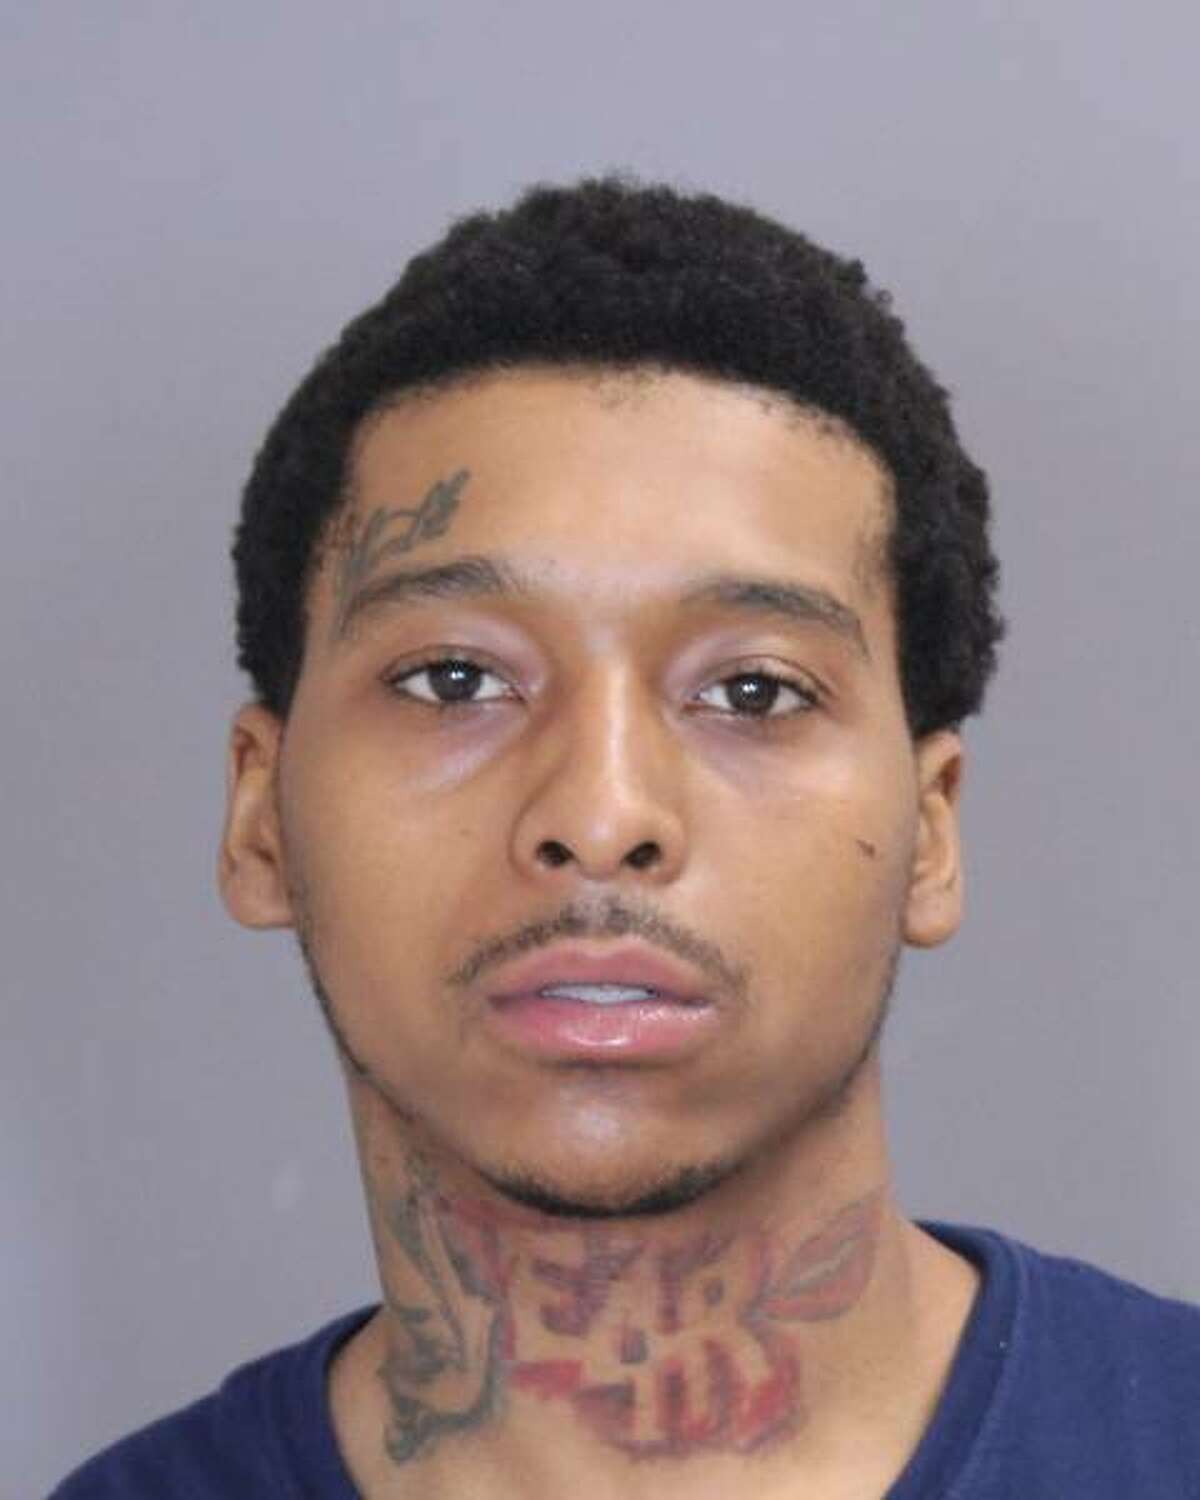 Paul AL Streeks of Schenectady is charged with murder in the May 11 shooting of Xiaa Price in a Colonie motel parking lot.